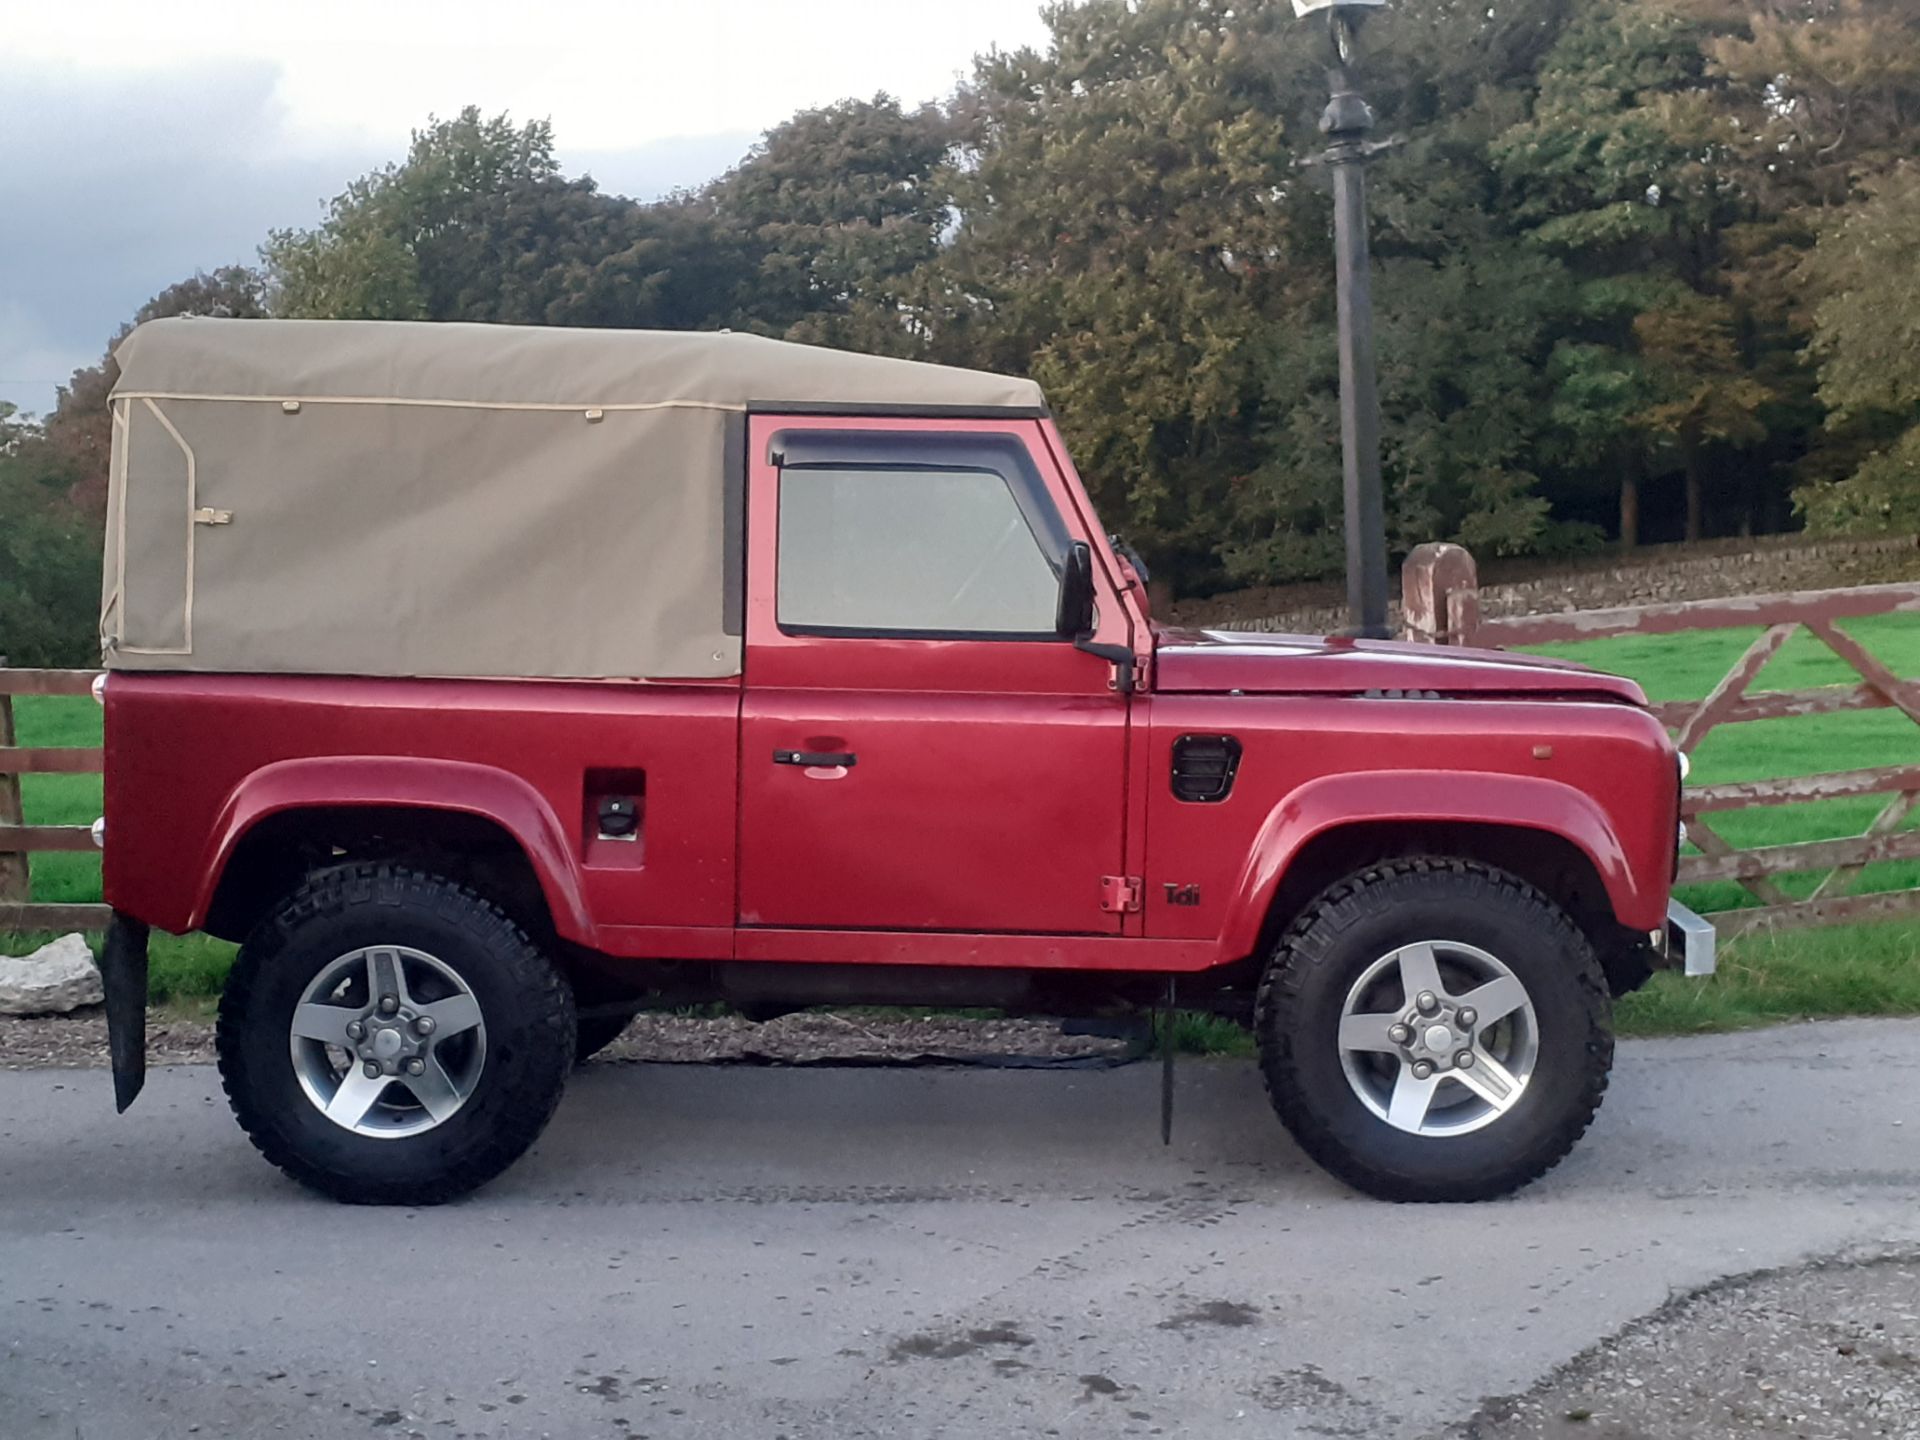 1998/R REG LAND ROVER DEFENDER 90 CSW TDI 95 RED CONVERTIBLE 6 SEATER, SHOWING 2 FORMER KEEPERS - Image 2 of 9